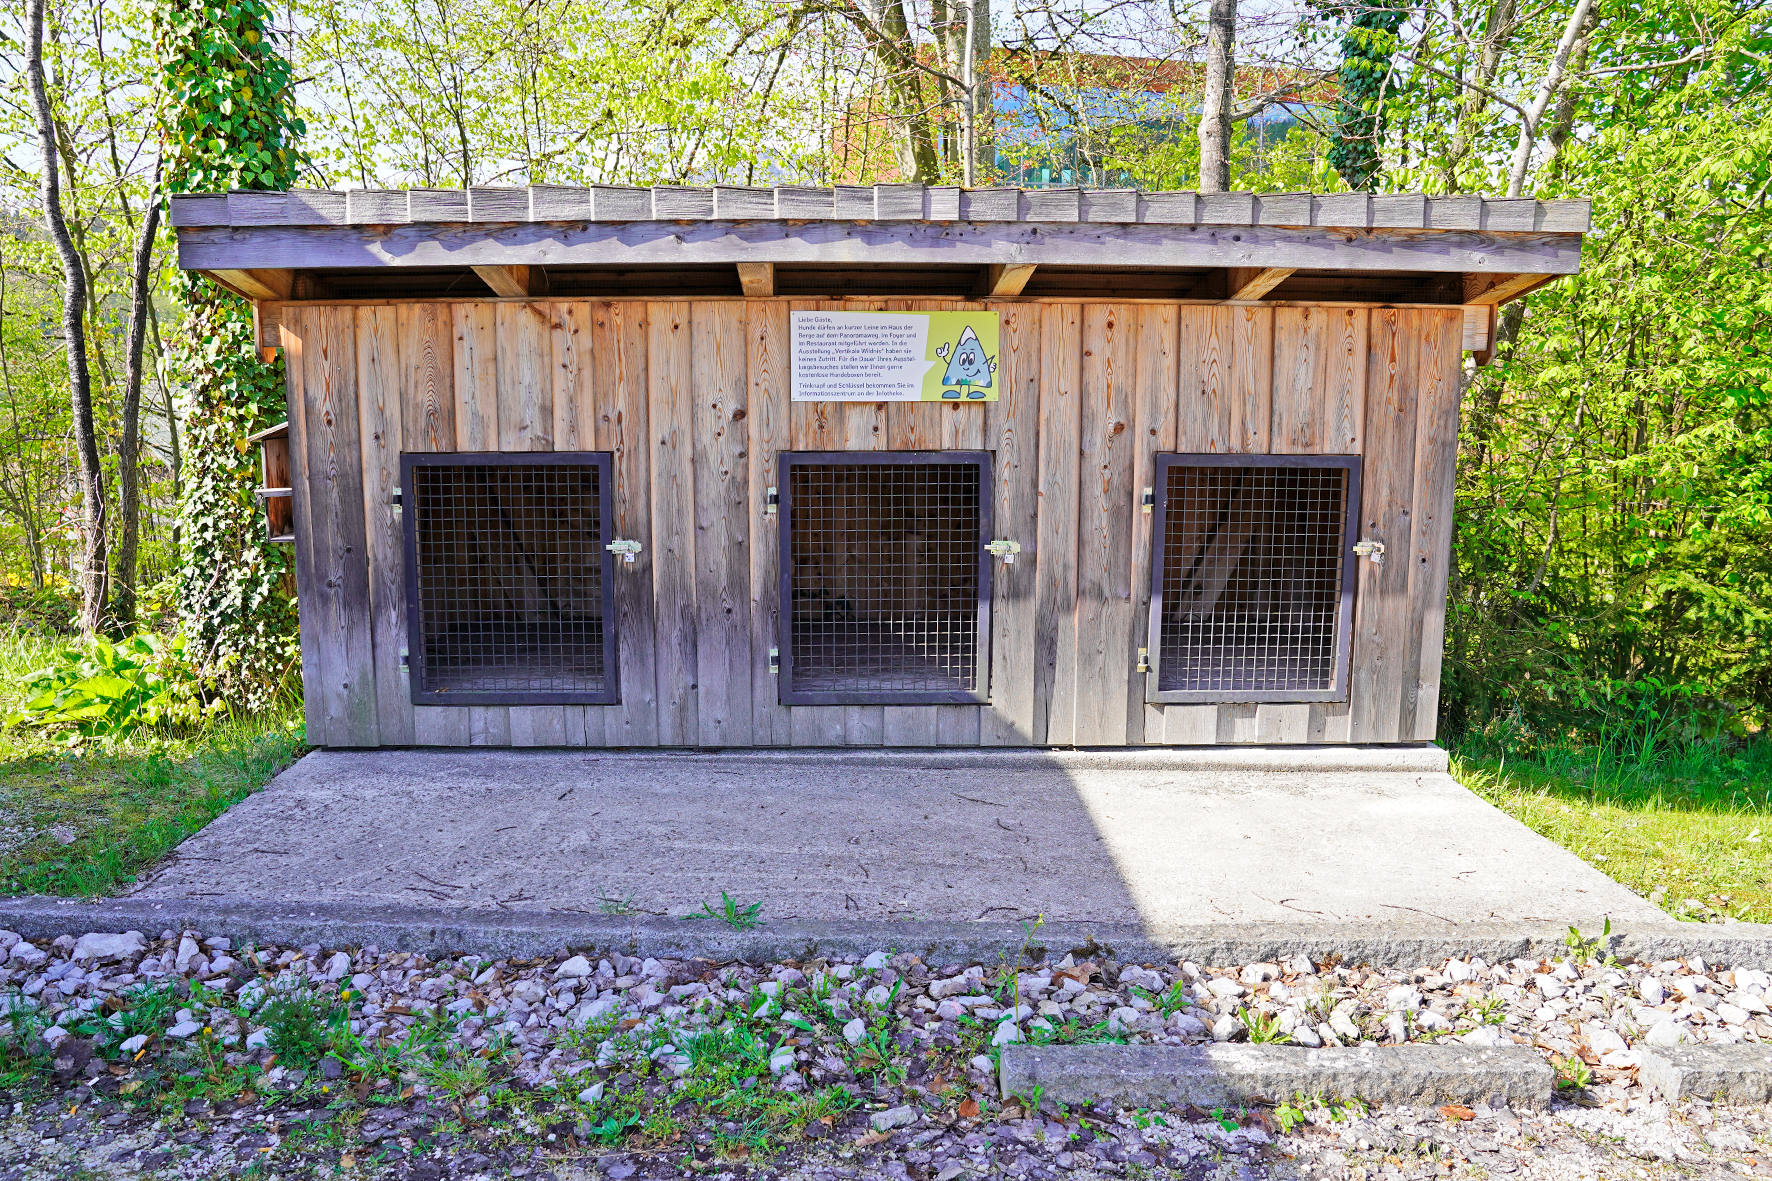 Dog Boxes National Park Center House of Mountains